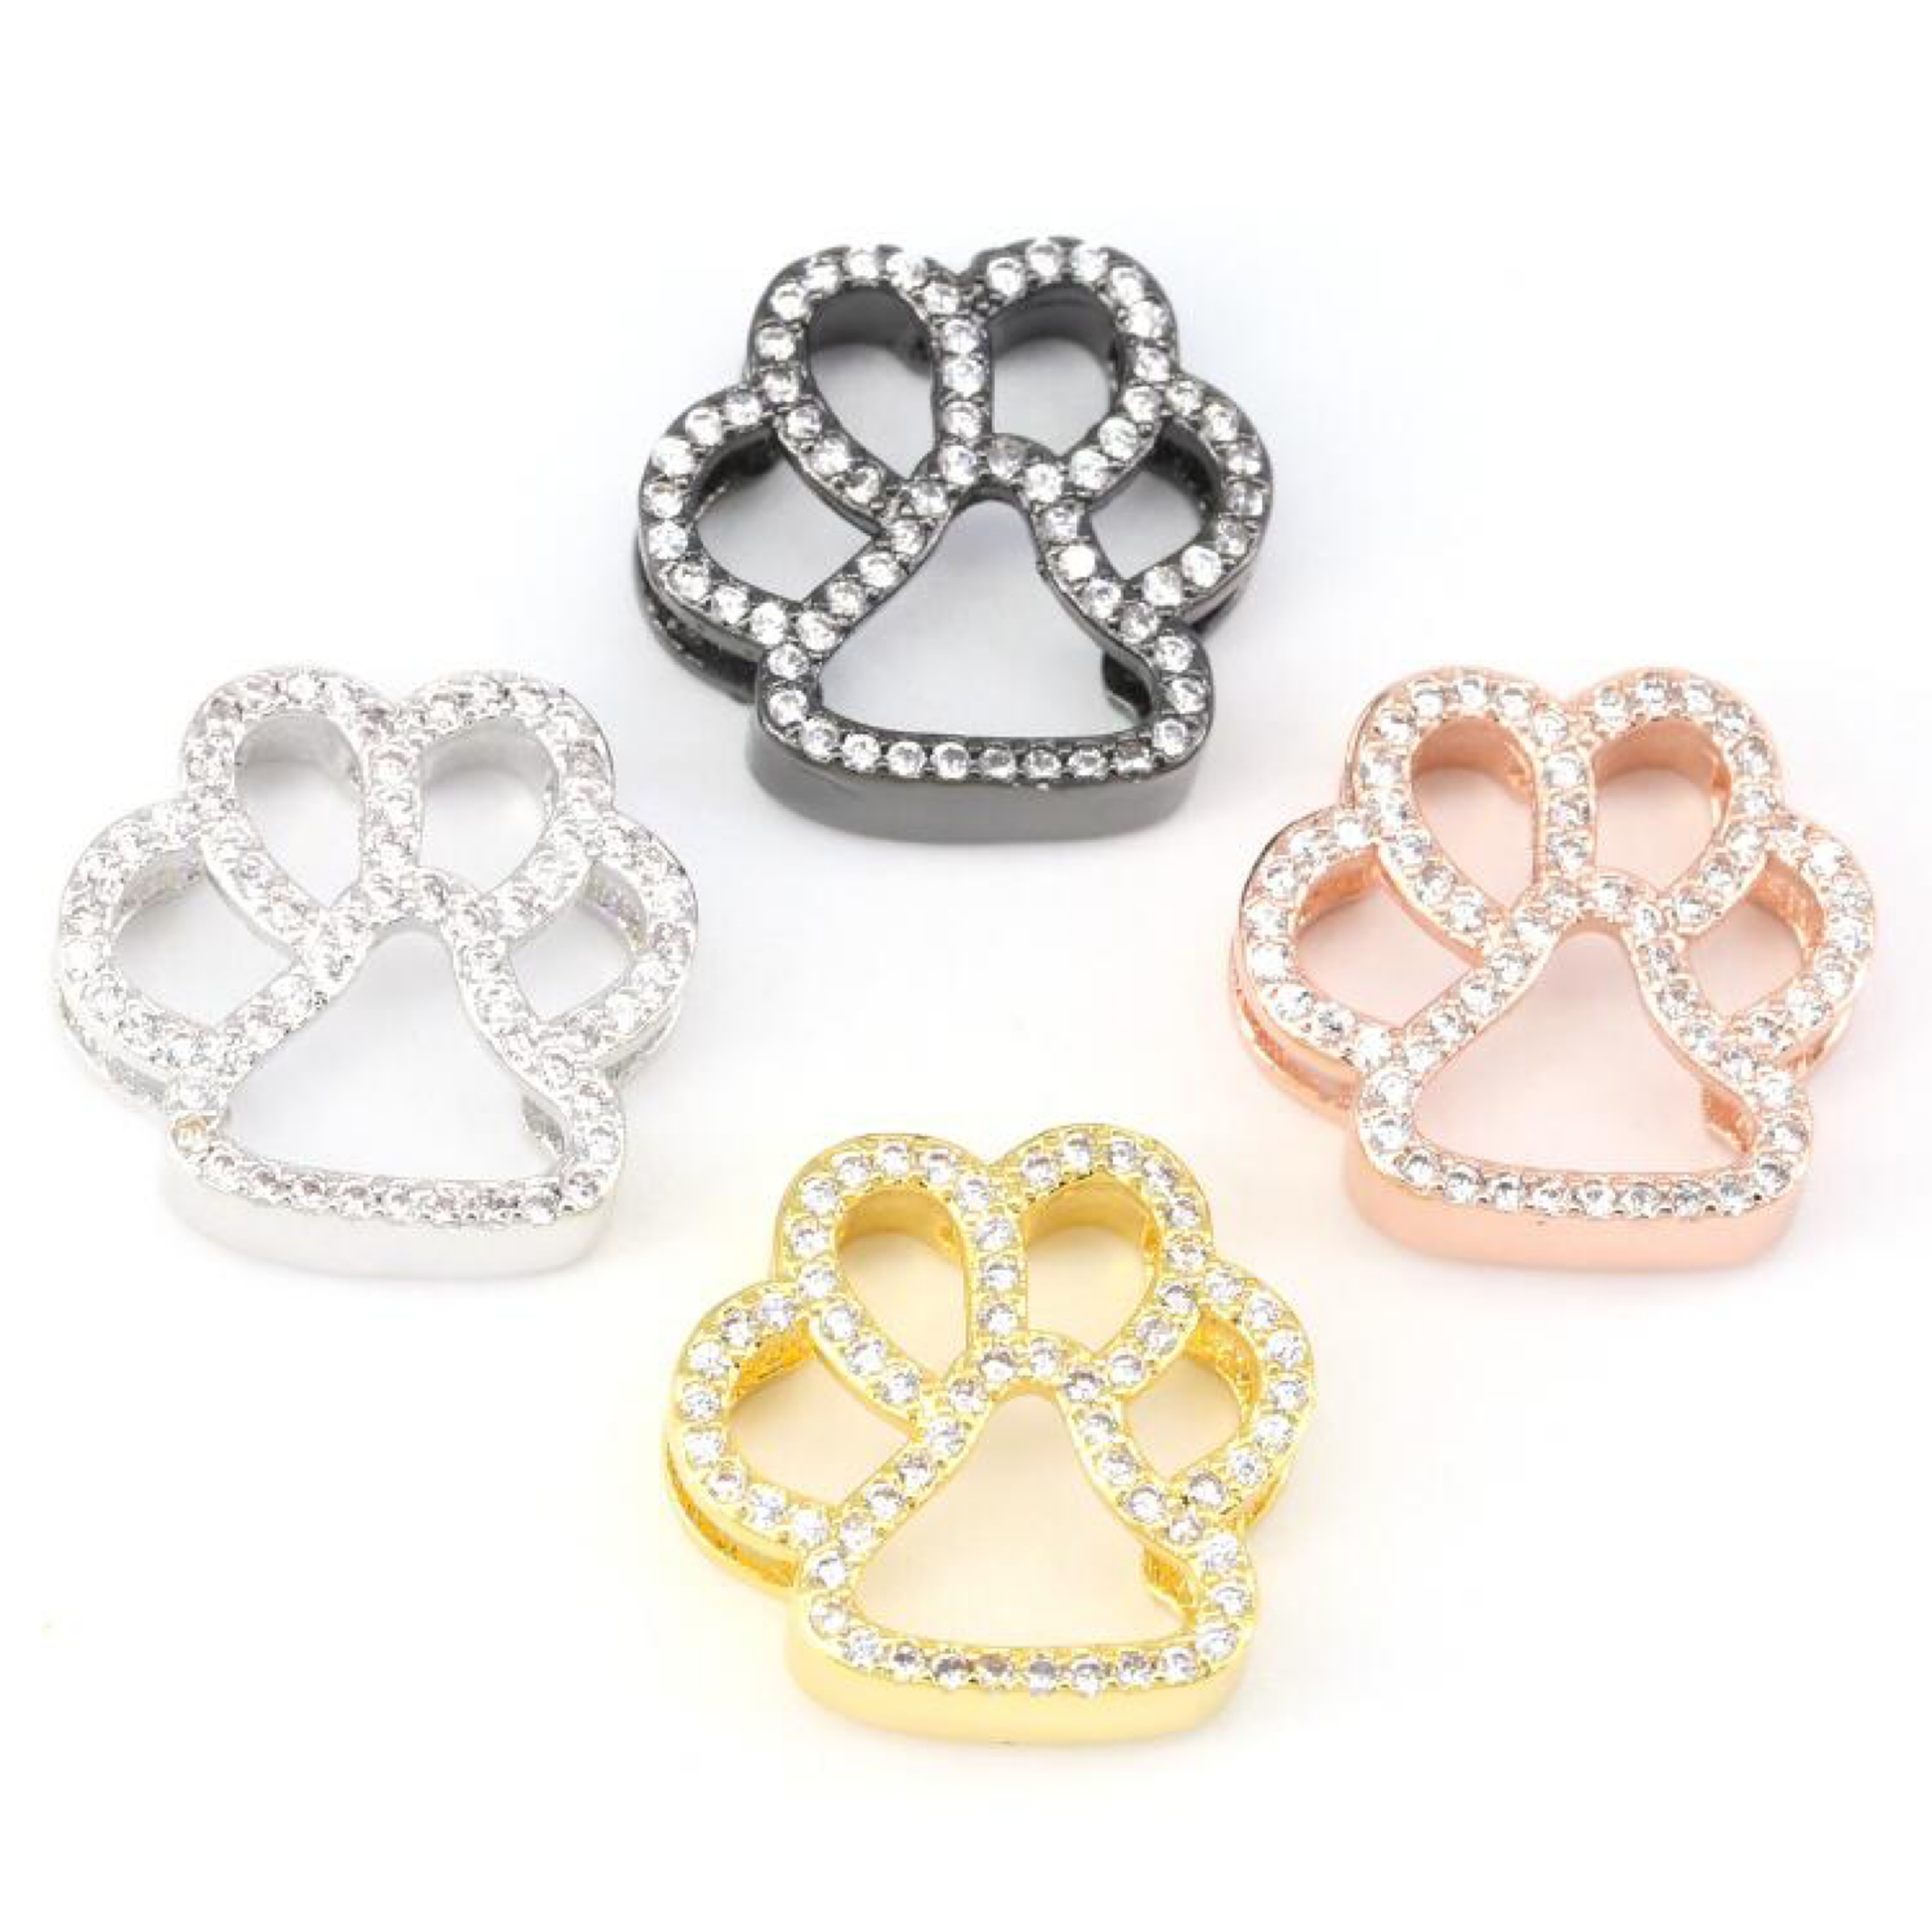 PAW CHARMS LIFE COLLECTION - Unique Brazilian Jewelry (4503163961419)